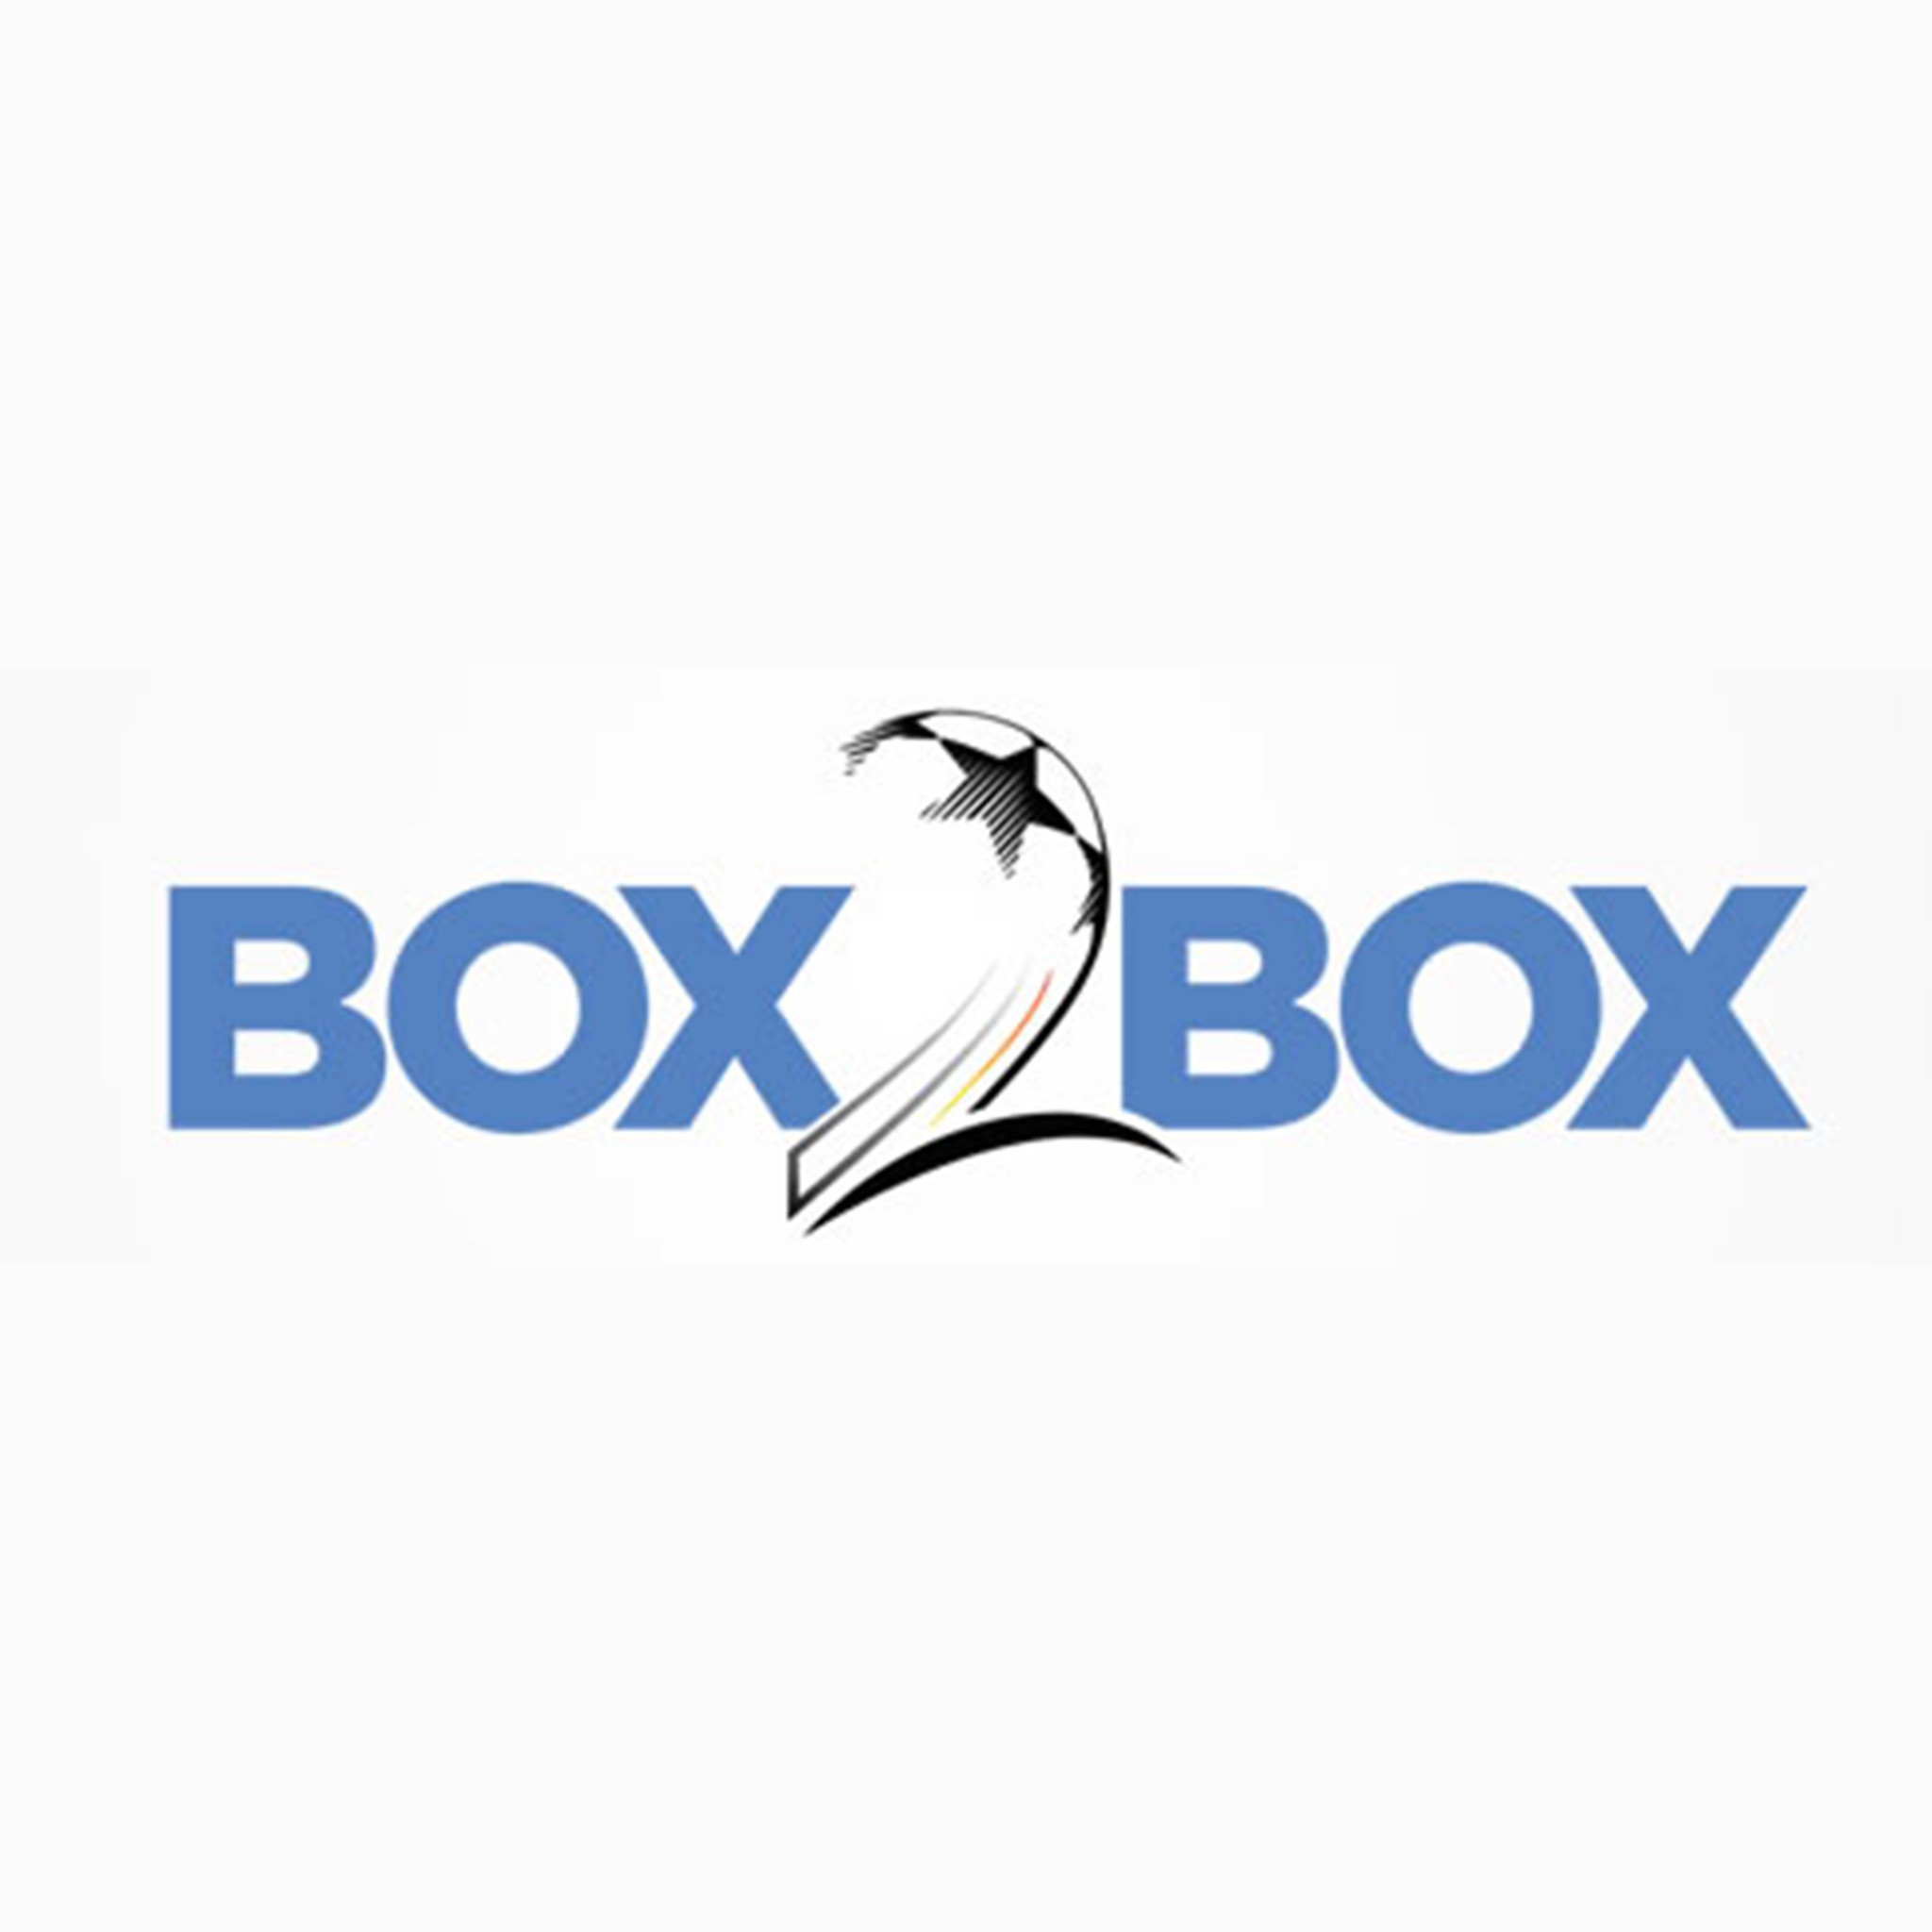 Box2Box - Asian Cup & AFCON Previews, with Steve Price & Rob Stevens